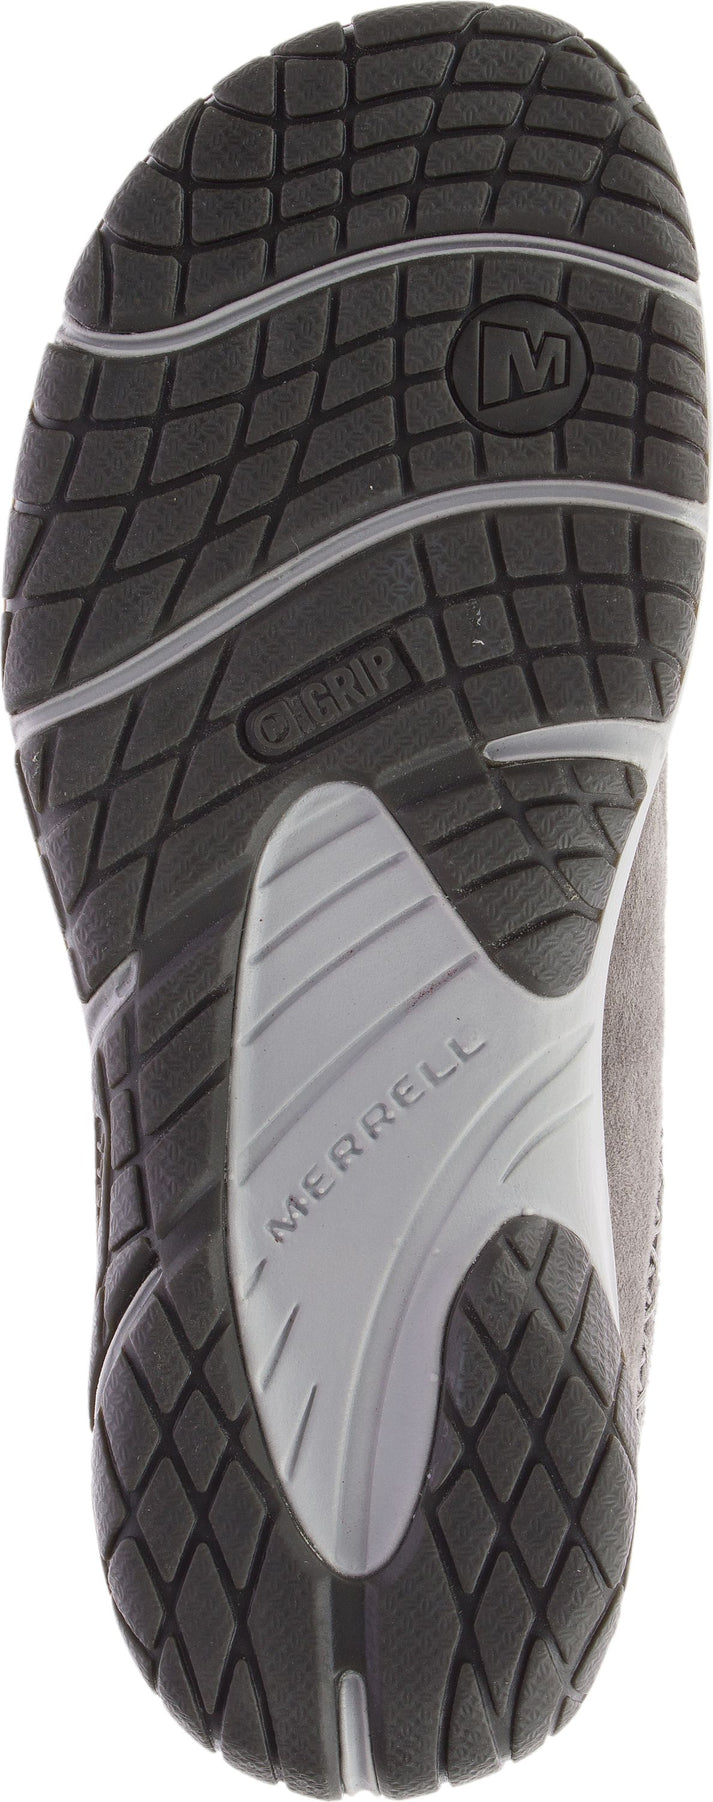 Merrell Boots Encore Ice 4 Charcoal